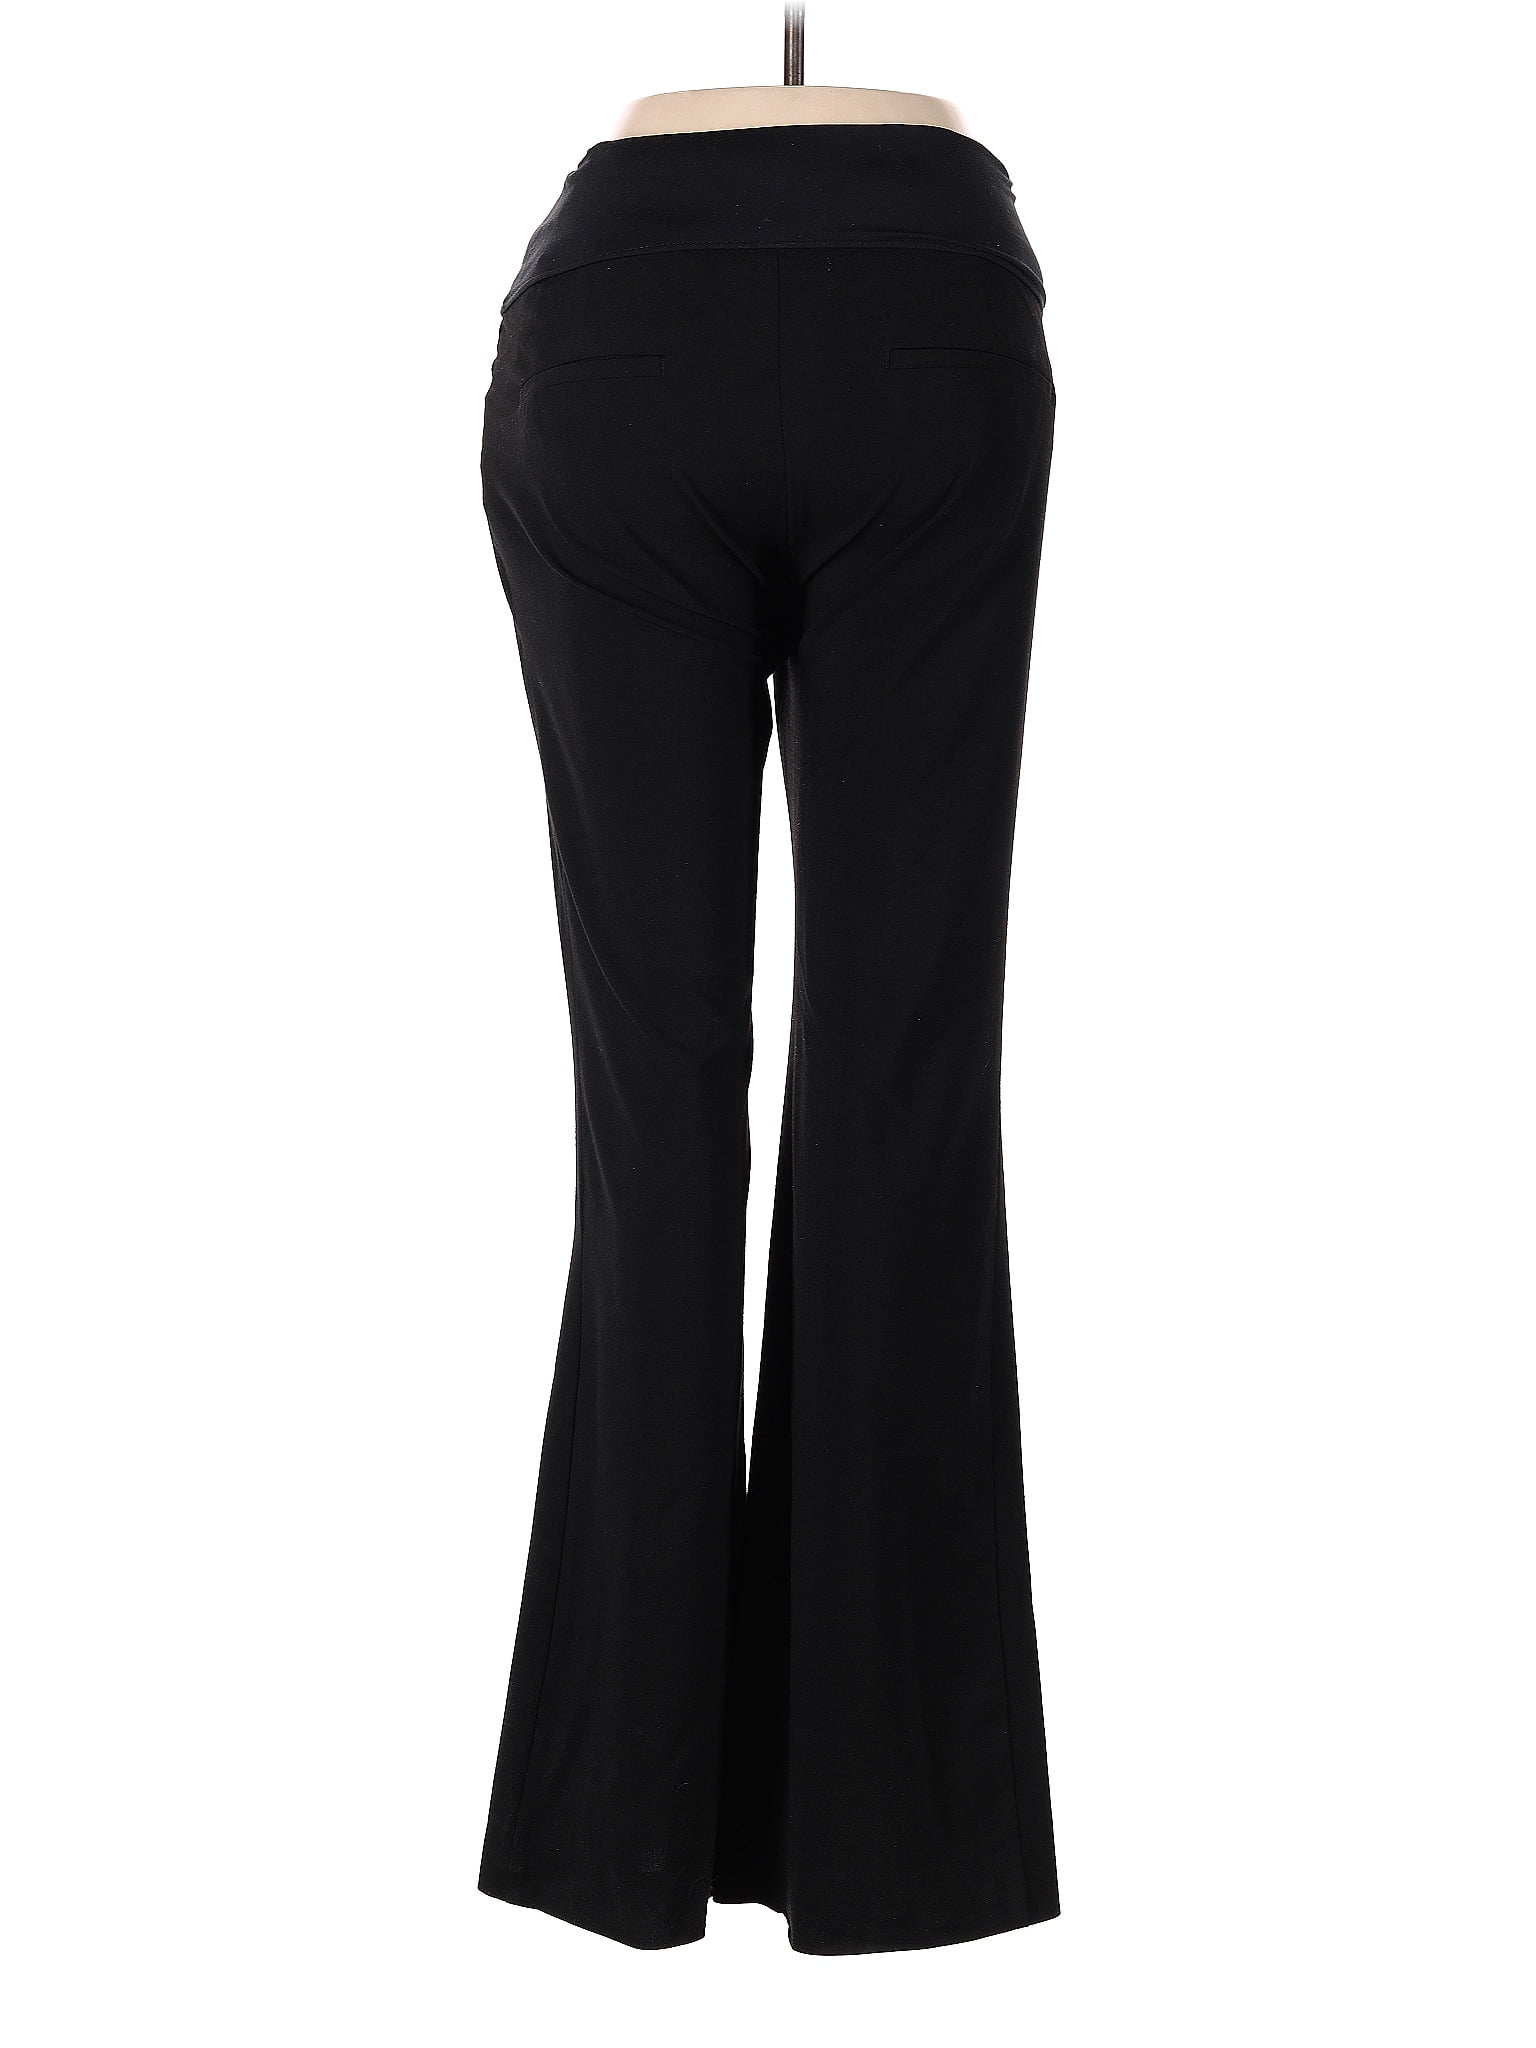 Maternity Solid Black Casual Pants Size 6 (Maternity) - 31% off